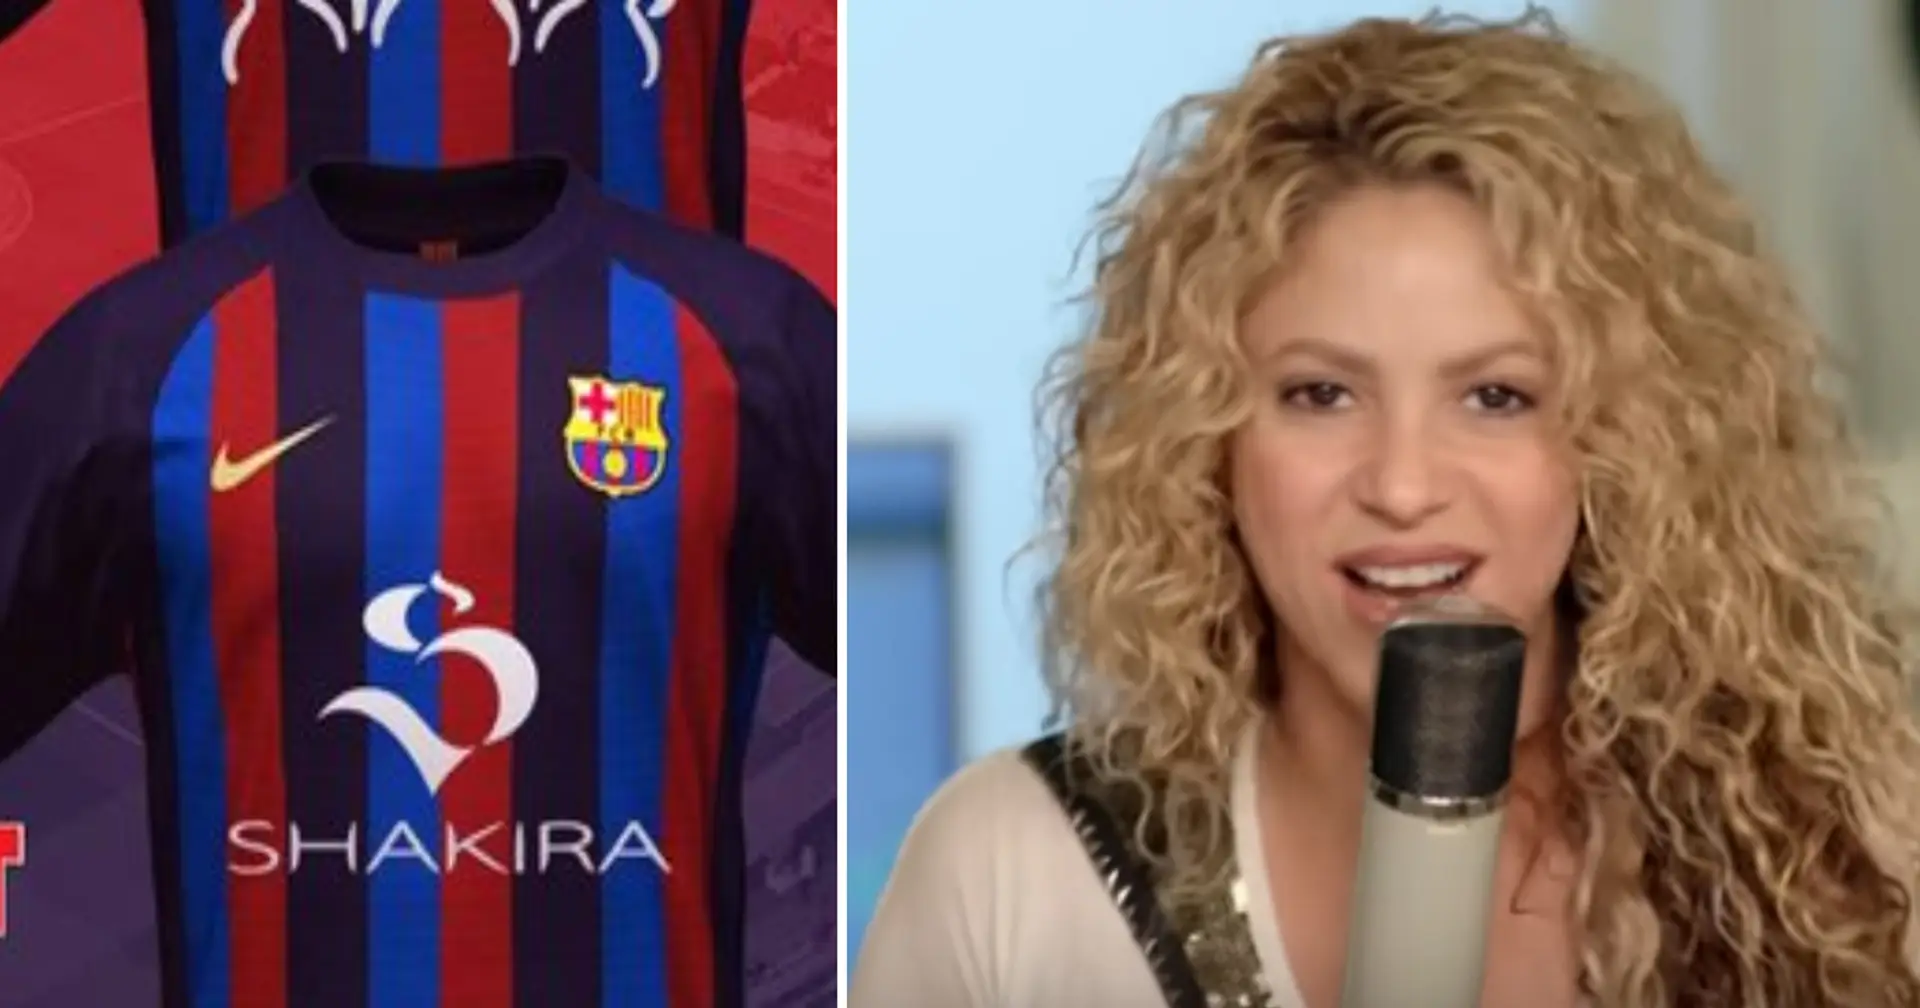 Cool or what? Barca to have names of pop stars like Shakira on their shirt next season